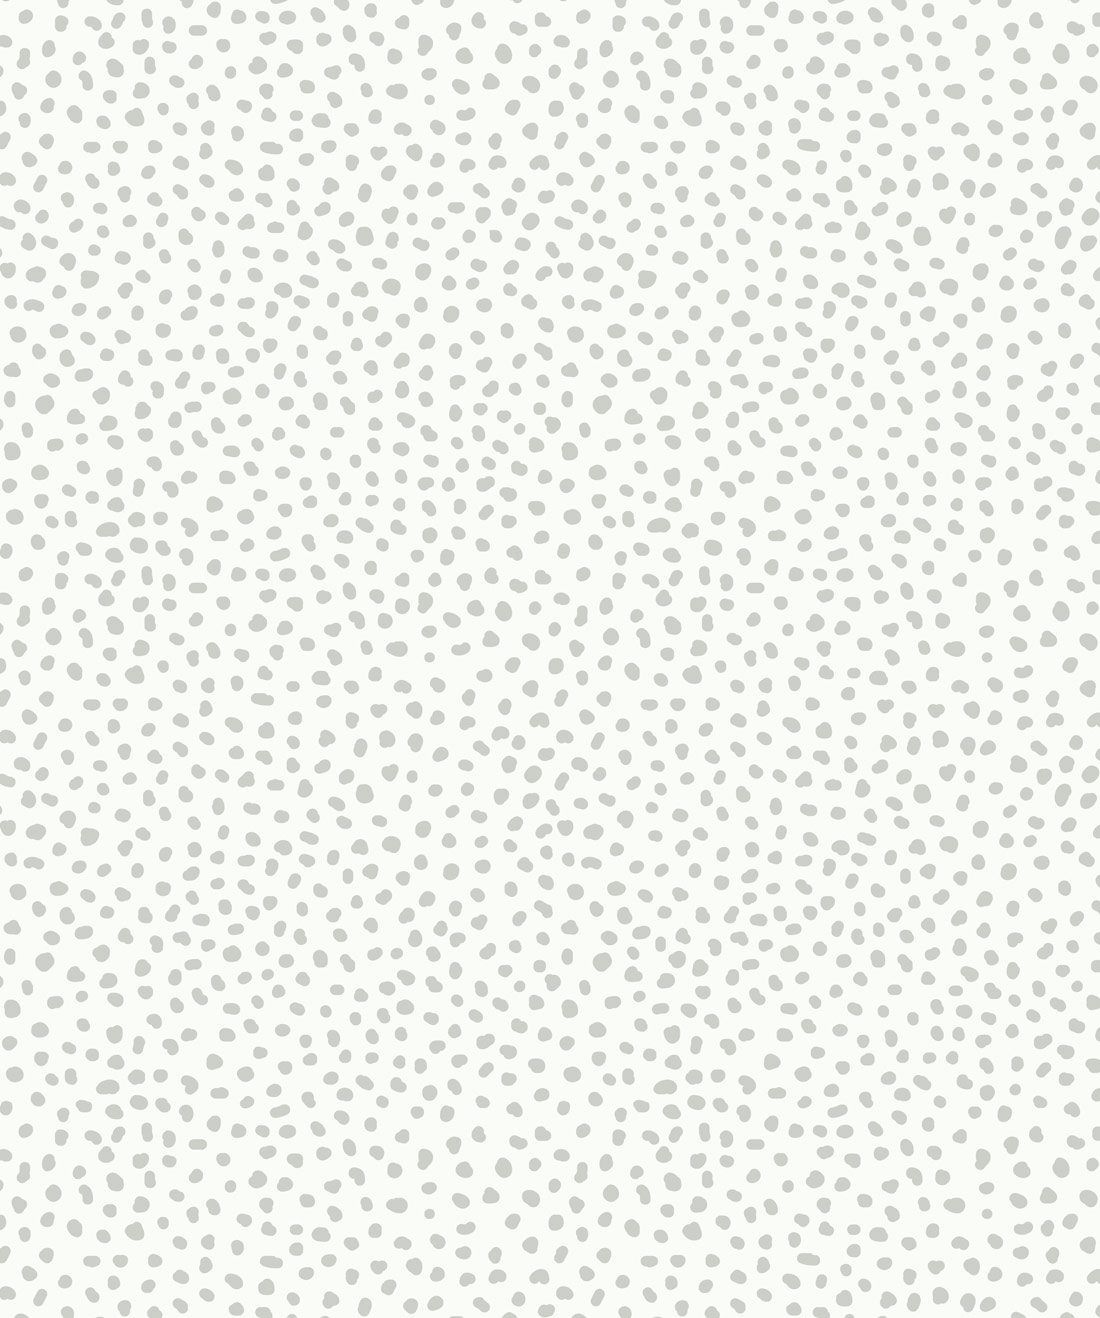 Huddy's Dots • Luxurious Spotted Wallpaper